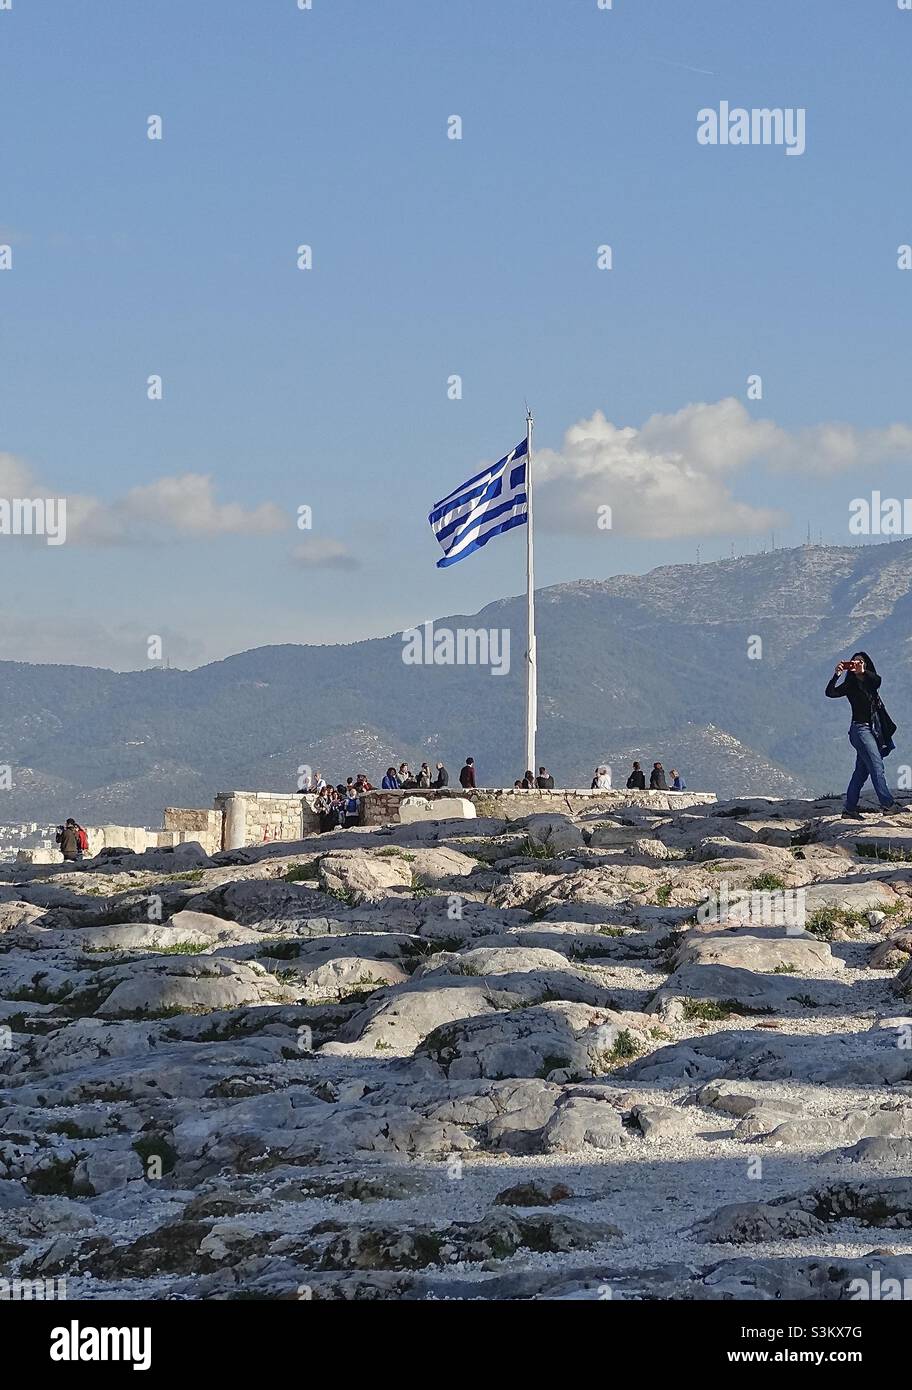 Winter scene on the Acropolis, Athens, Greece, close to the Parthenon. Visitors are grouped near the Greek flag in a small Belvedere to admire the views. Behind is Hymettus (1026m), a mountain range. Stock Photo